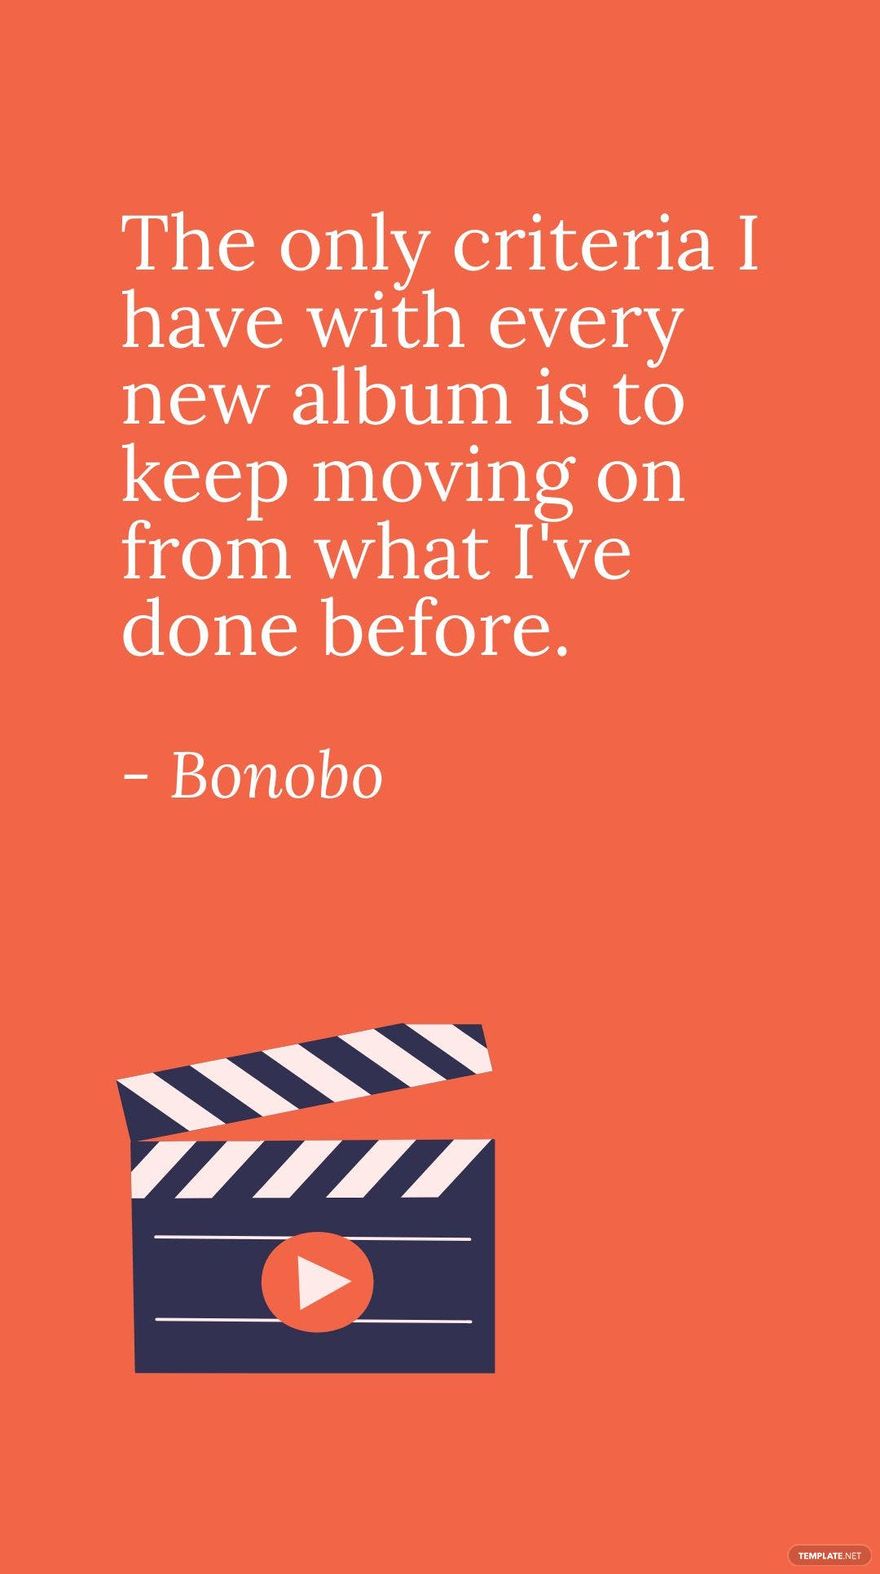 Free Bonobo - The only criteria I have with every new album is to keep moving on from what I've done before. in JPG